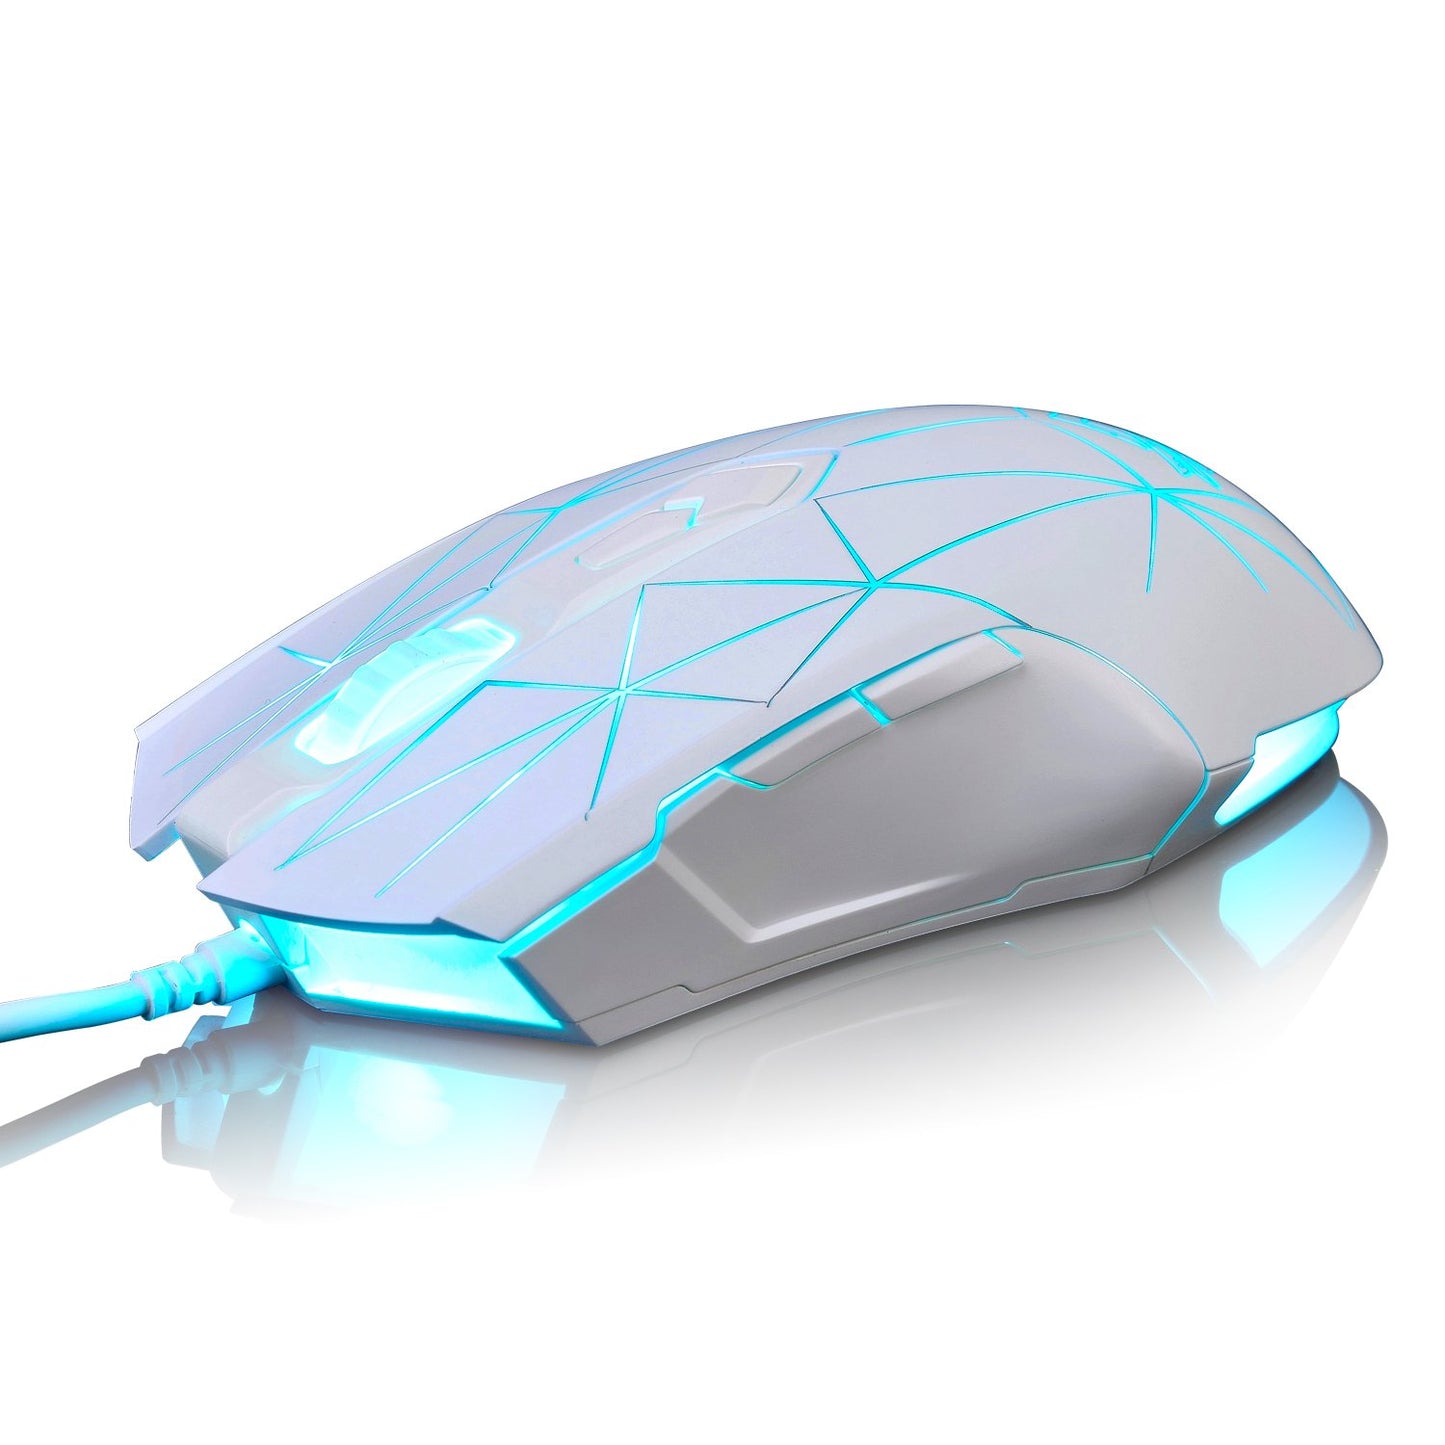 FIRSTBLOOD ONLY GAME. AJ52 Watcher RGB Gaming Mouse, Programmable 7 Buttons, Ergonomic LED Backlit USB Gamer Mice Computer Laptop PC, for Windows Mac Linux OS, Star White - amzGamess